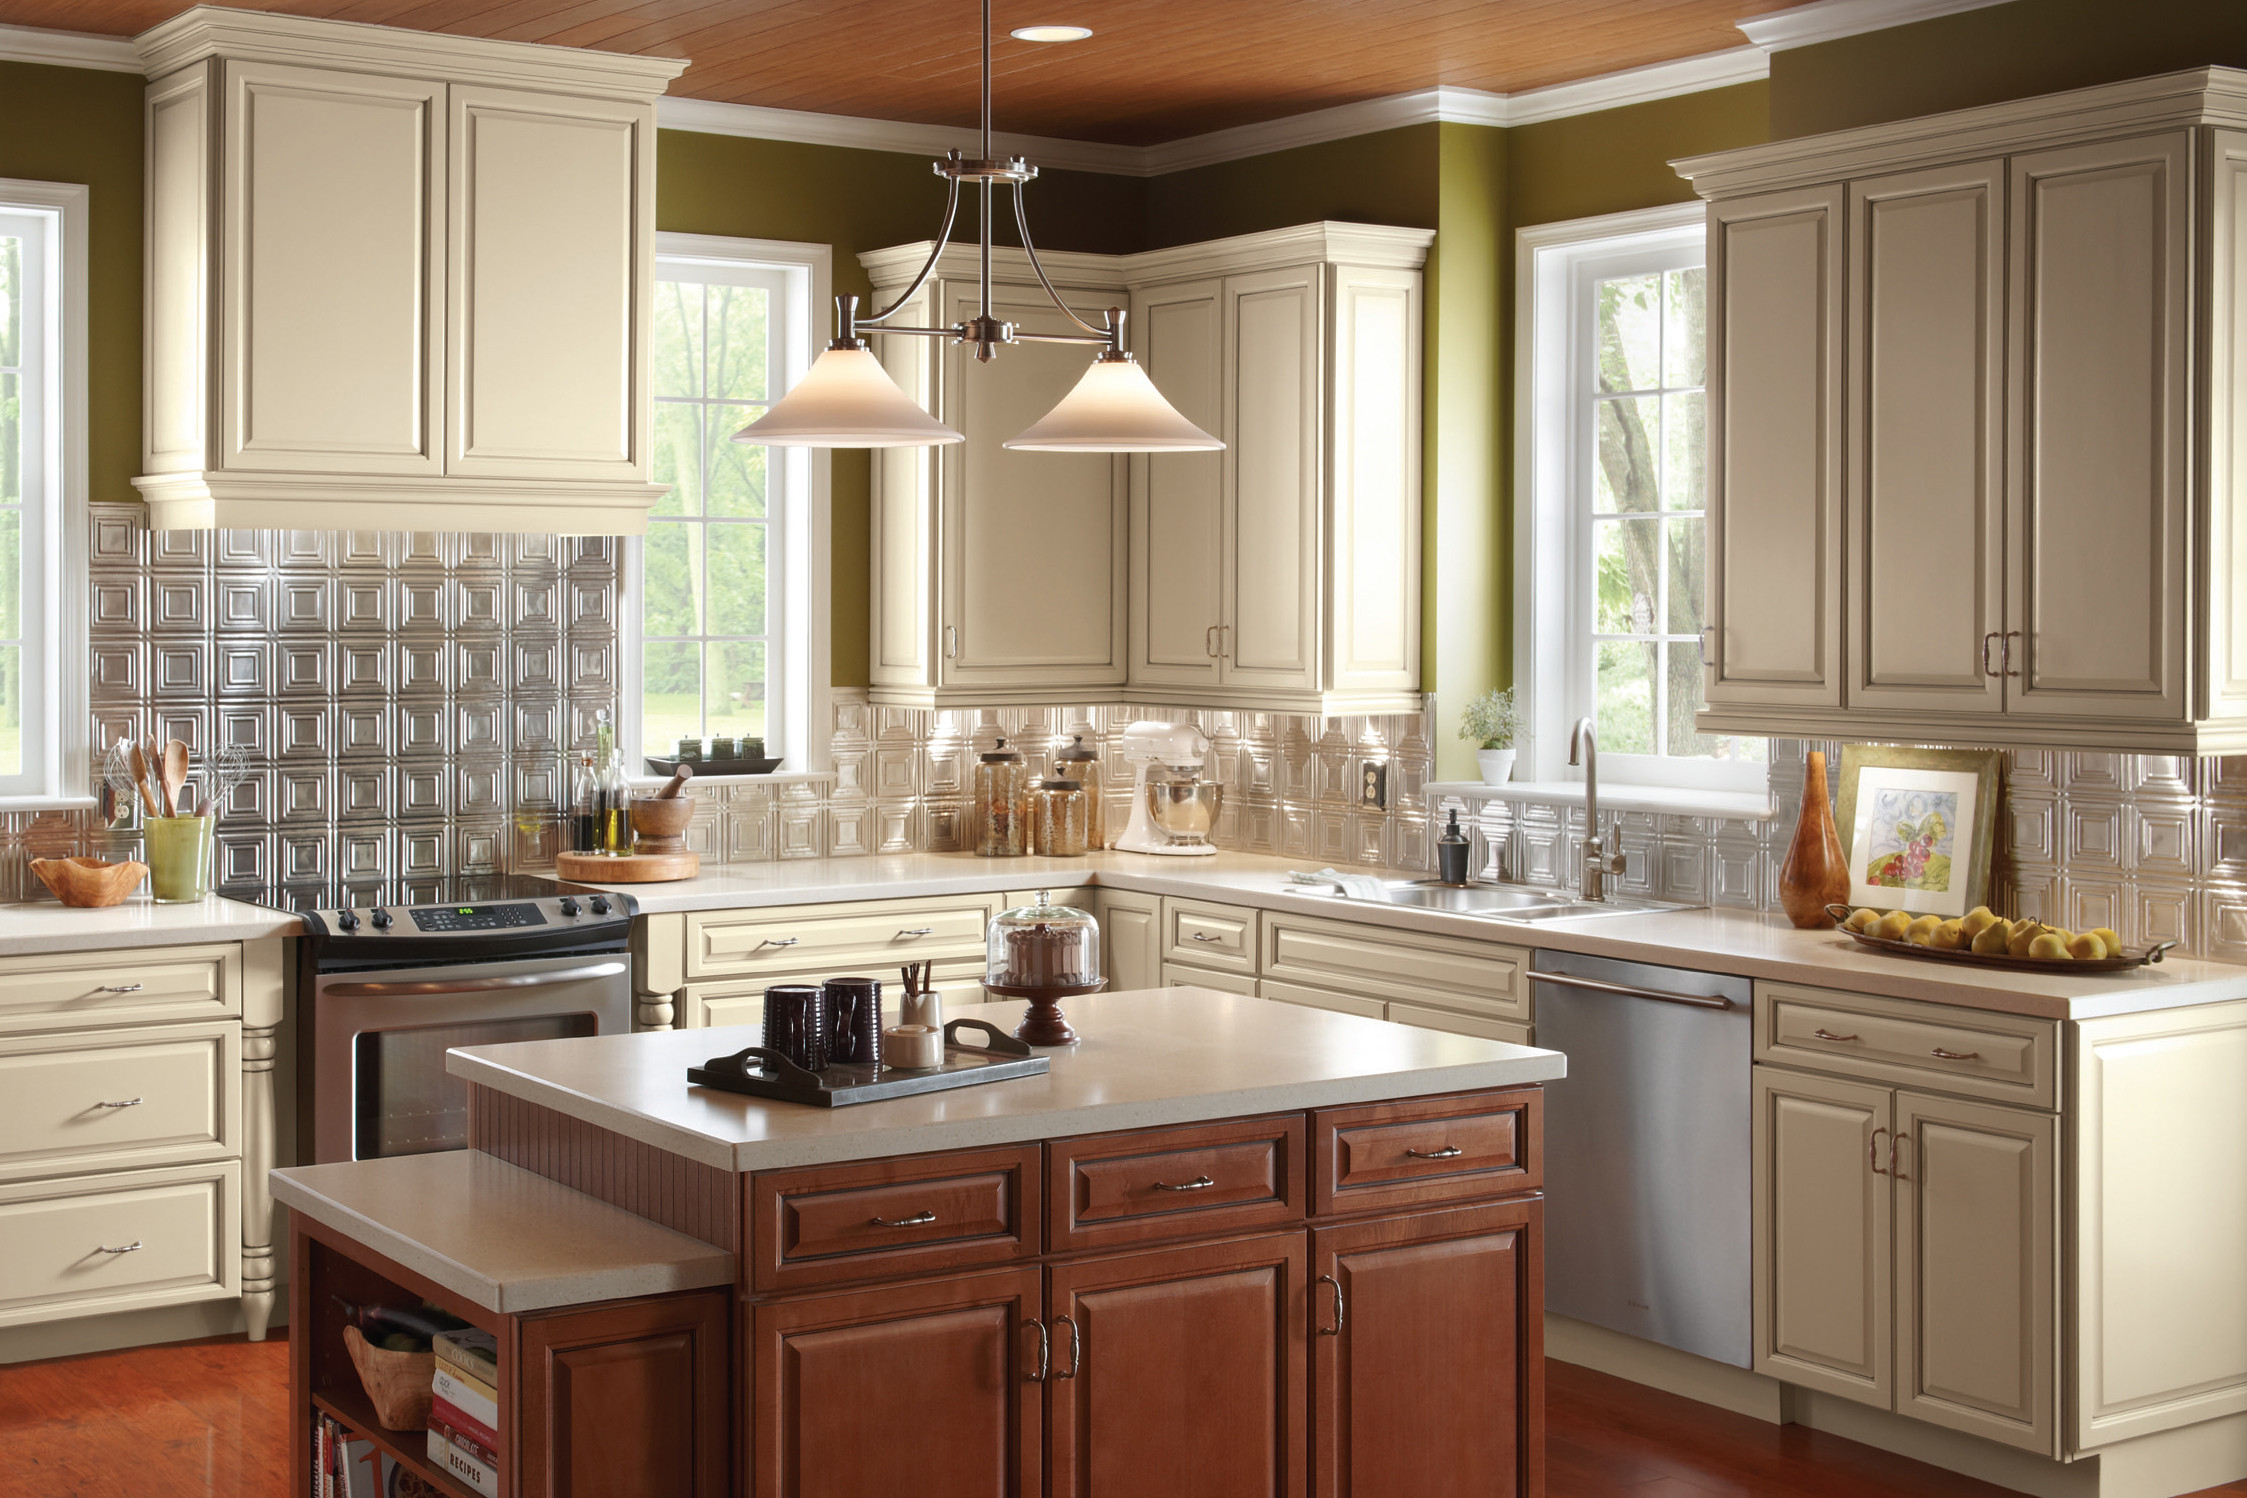 Kitchen Cabinet Remodeling
 Former Armstrong Cabinets Relaunched in New Echelon